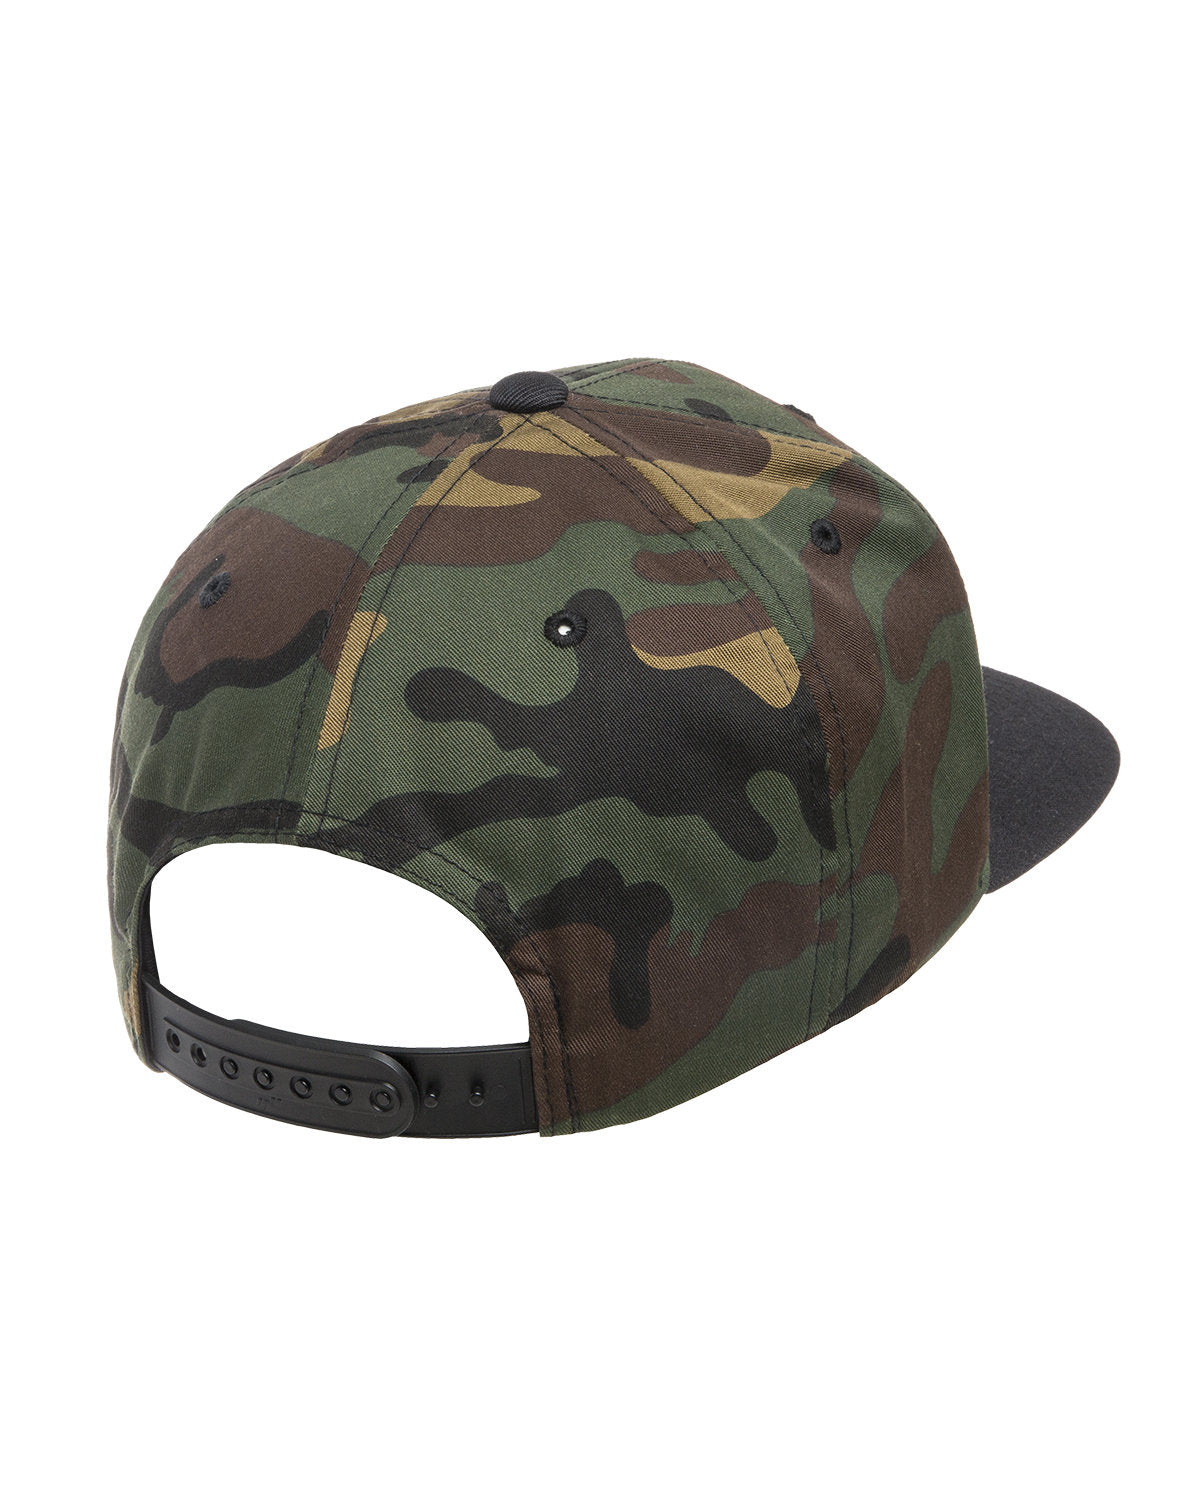 Camo, tan, brown and black hat with black brim.  Snap back view.